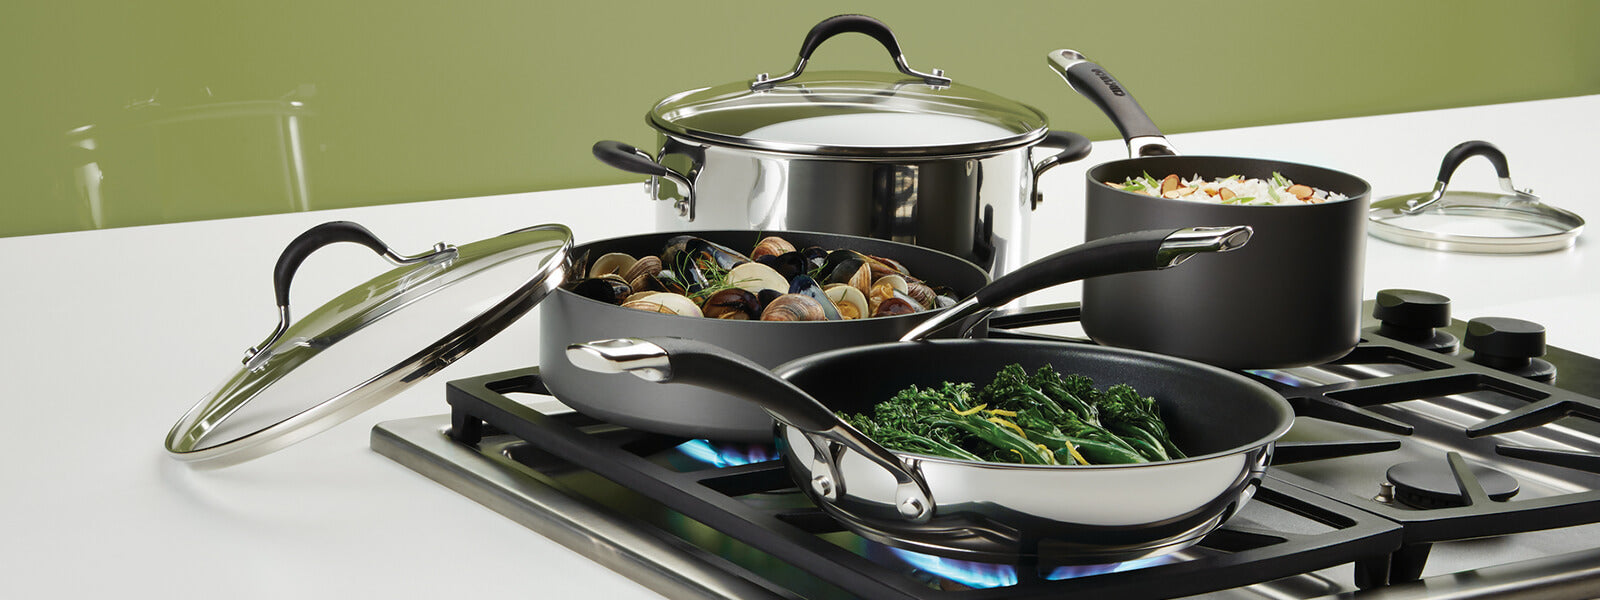 Best space saving cookware set for your kitchen - PotsandPans India